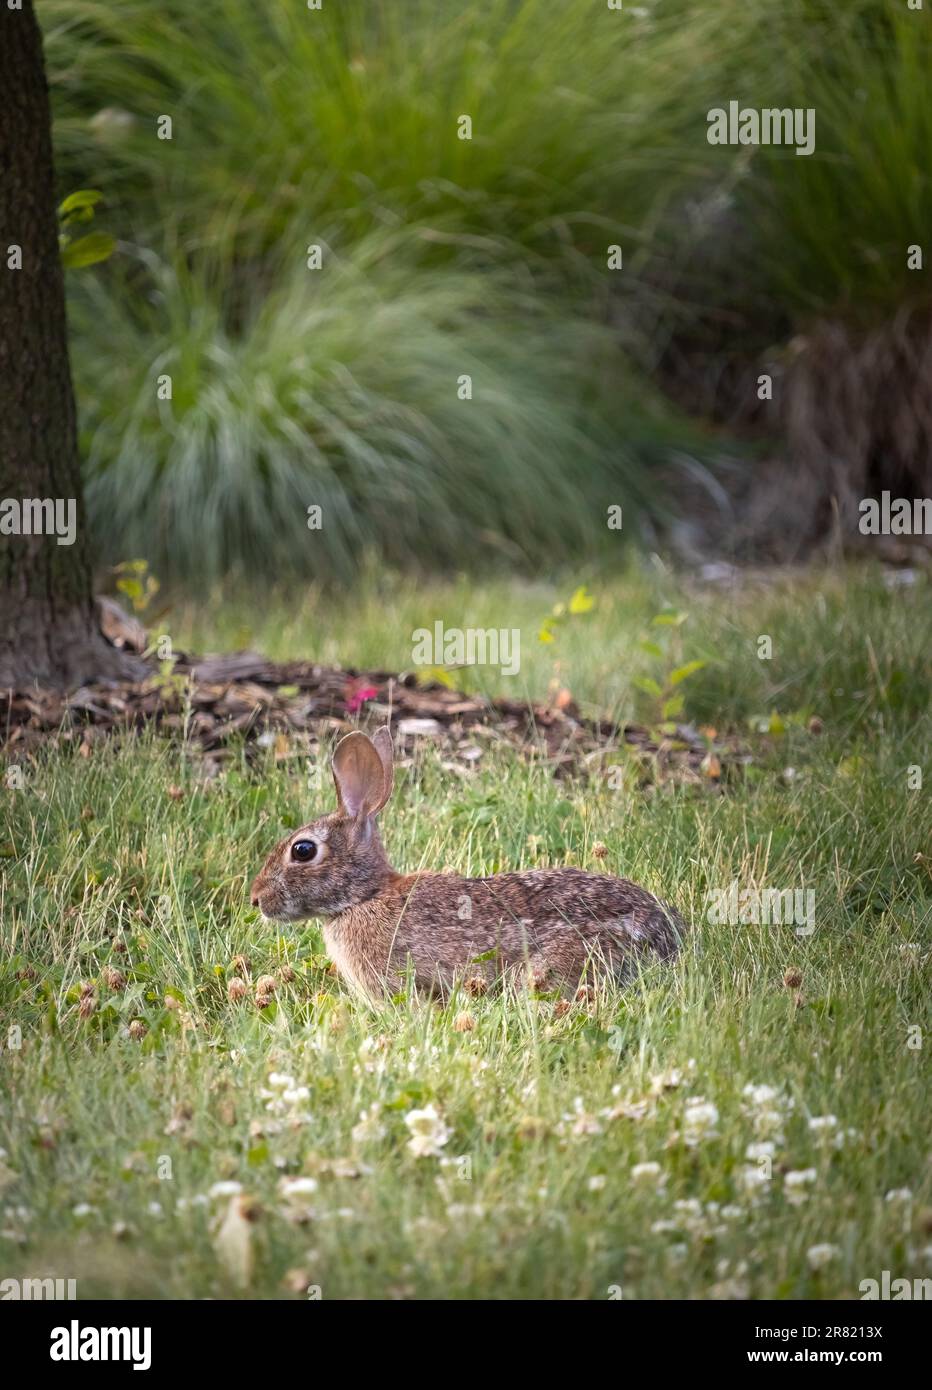 A young rabbit, silvilagus floridanus, surrounded by grass with a lush green background and clover foreground in summer or fall, Pennsylvania Stock Photo